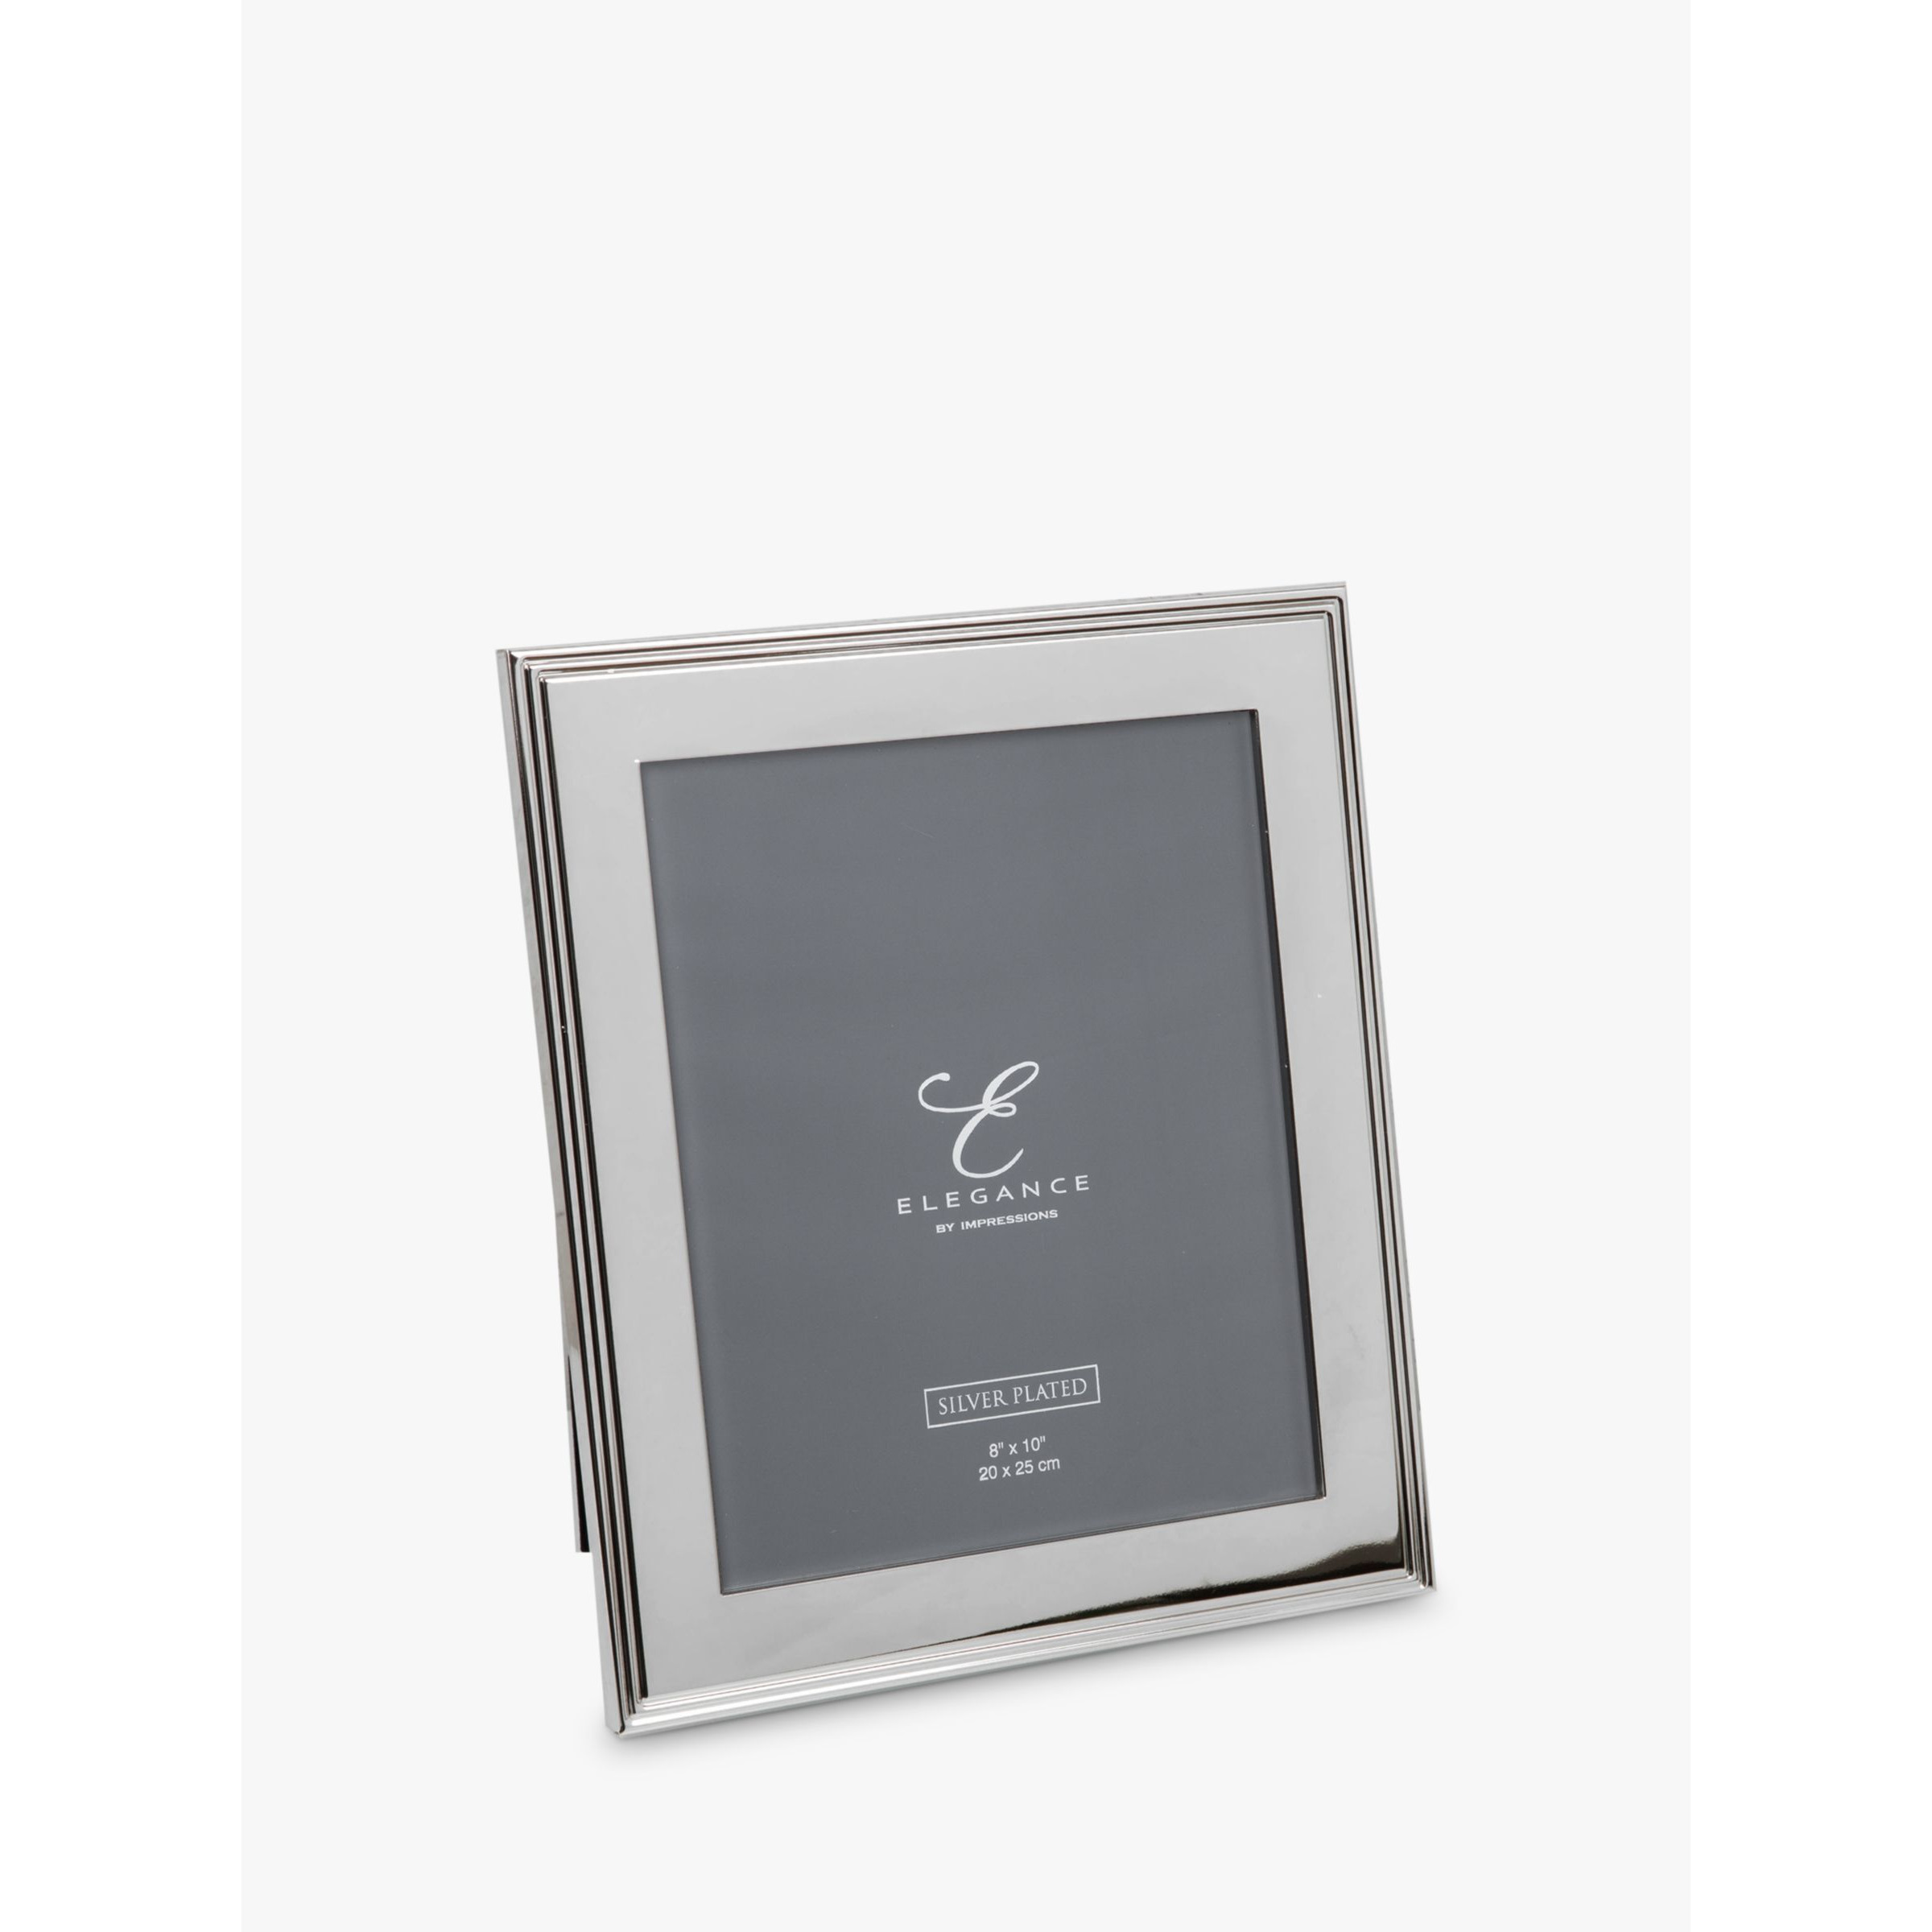 Elegance by Impressions Ribbed Photo Frame, Silver Plated - image 1